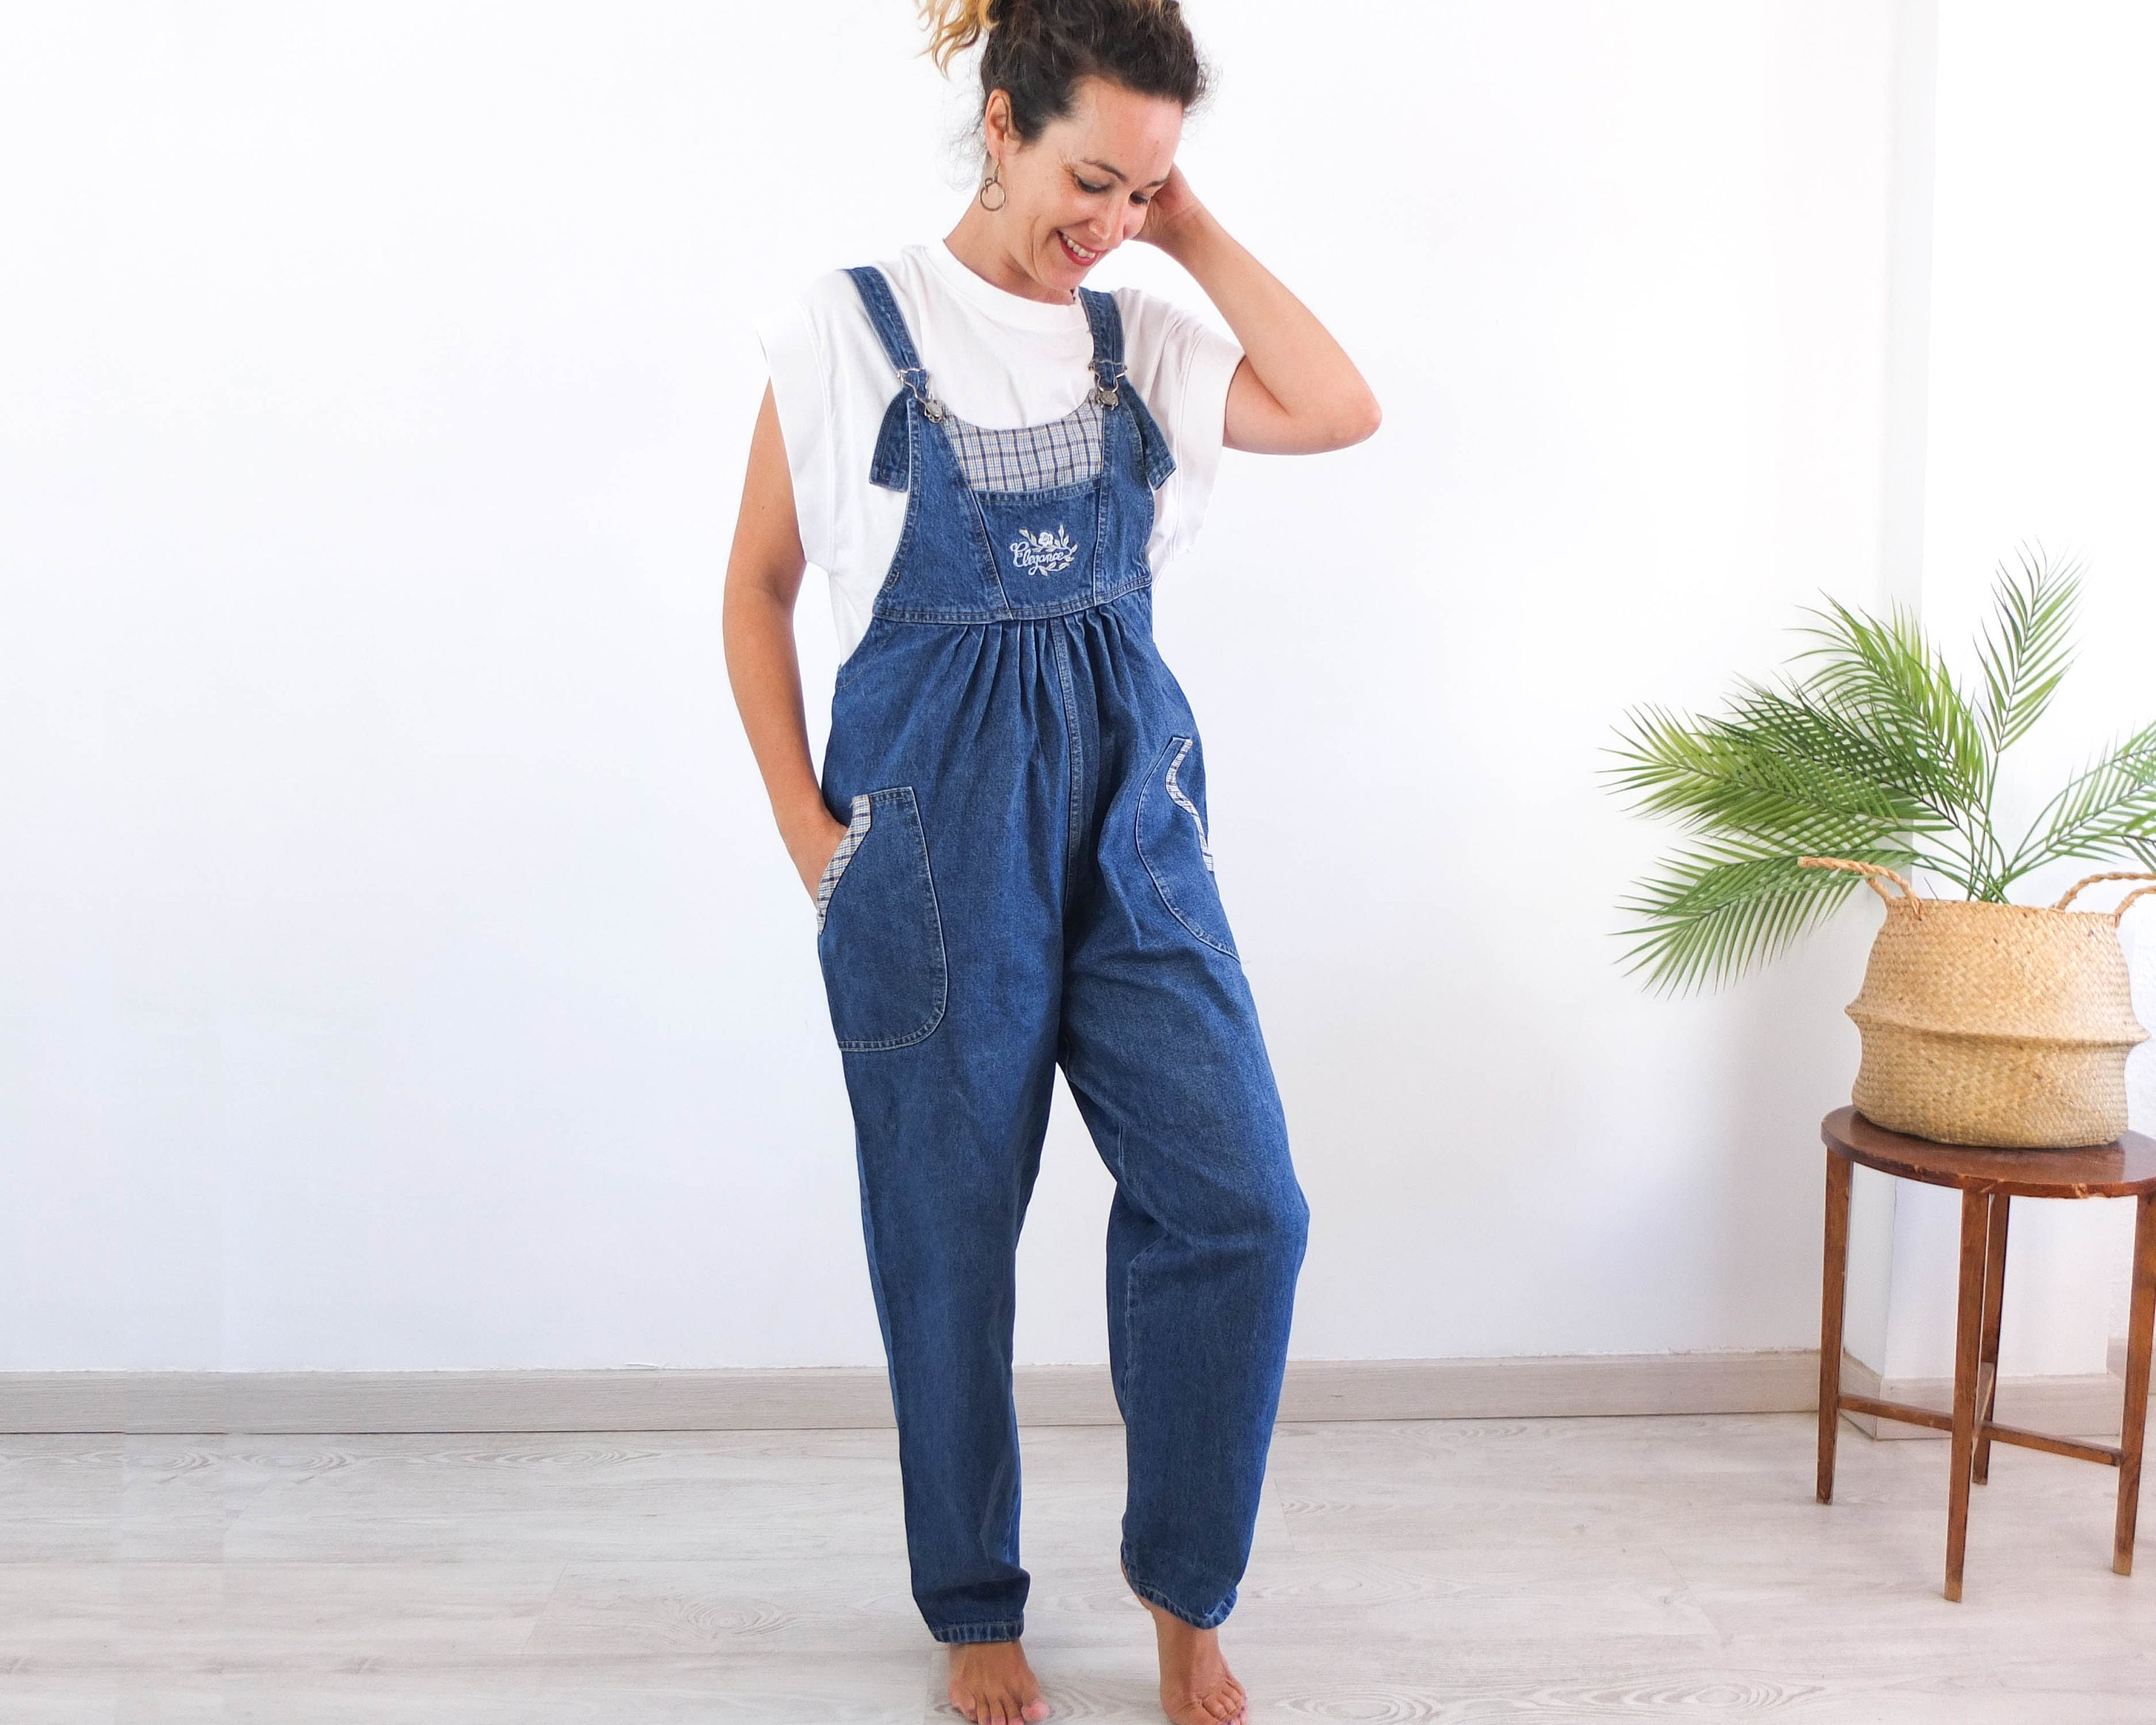 Navy Blue XL PitBull dungaree WOMEN FASHION Baby Jumpsuits & Dungarees Jean Dungaree discount 57% 